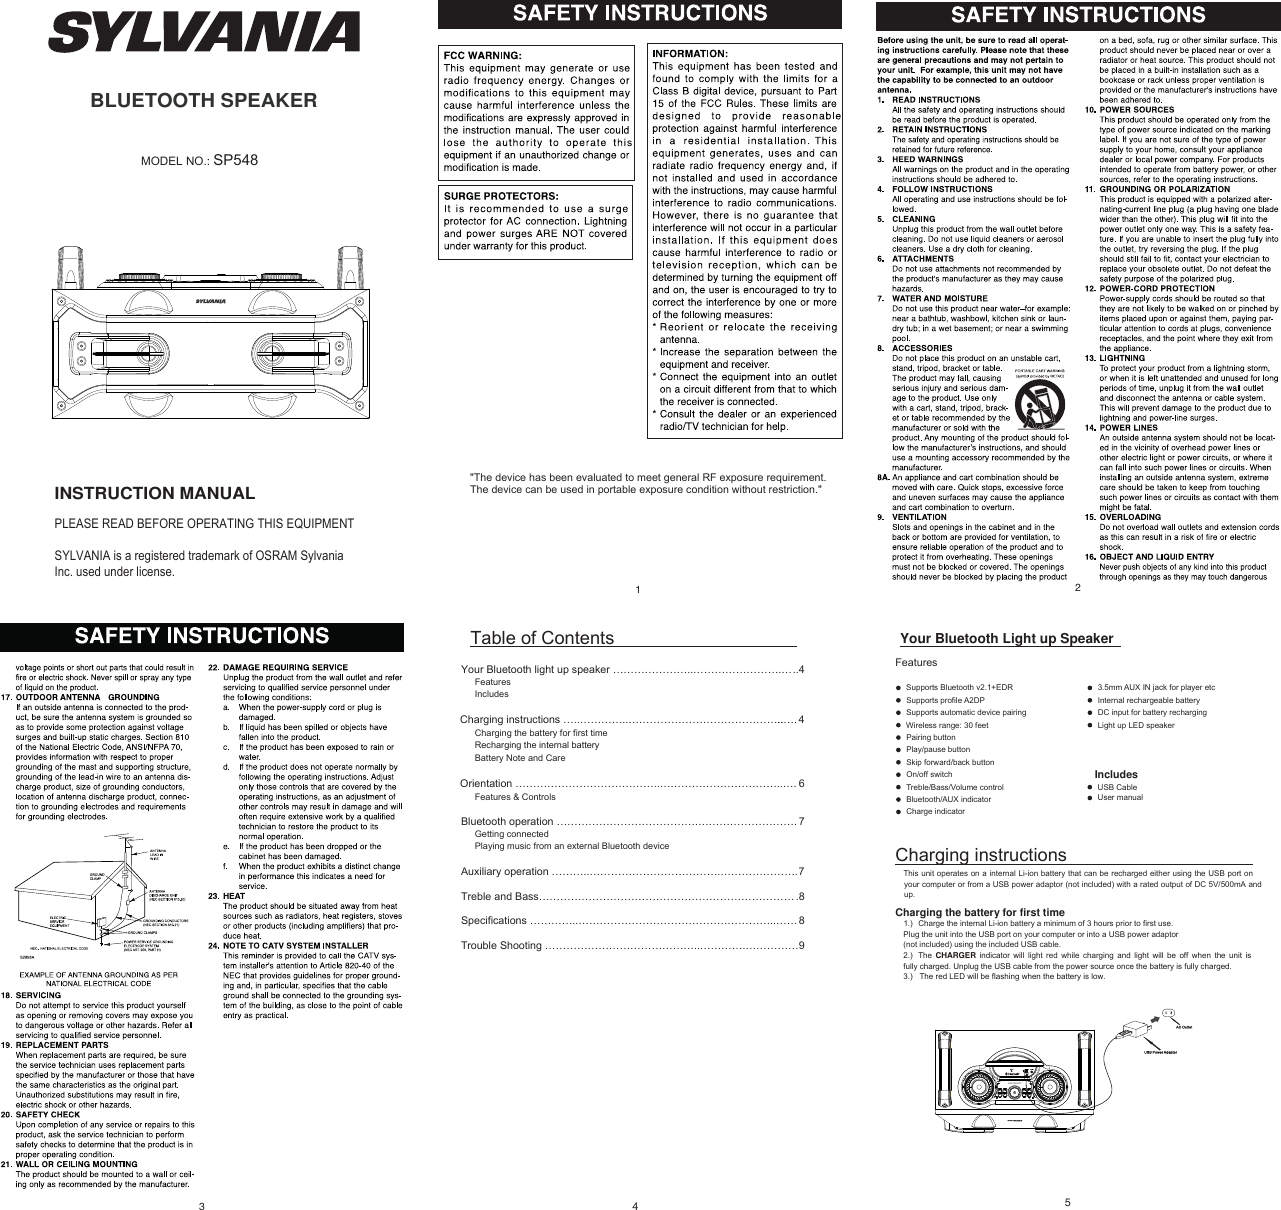 BLUETOOTH SPEAKERINSTRUCTION MANUALPLEASE READ BEFORE OPERATING THIS EQUIPMENTSYLVANIA is a registered trademark of OSRAM Sylvania Inc. used under license.MODEL NO.: SP54831Table of Contents Your Bluetooth light up speaker …………………..…………………….…..4FeaturesIncludes 4.…....……………………………………..…………..…snoitcurtsni gnigrahCCharging the battery for first timeRecharging the internal batteryBattery Note and CareOrientation …………………………………..……………………………..…. 6Features &amp; ControlsBluetooth operation ………………………………….………………………. 7Getting connectedPlaying music from an external Bluetooth deviceAuxiliary operation ………..……………………………….………………….7Treble and Bass……………………………………………………………….8Specifications …………..………………………………………………..…… 8Trouble Shooting ……………………………………..………….……………942Your Bluetooth Light up Speaker FeaturesSupports Bluetooth v2.1+EDRSupports profile A2DPSupports automatic device pairingWireless range: 30 feetPairing buttonPlay/pause buttonSkip forward/back buttonOn/off switchTreble/Bass/Volume controlBluetooth/AUX indicatorCharge indicator3.5mm AUX IN jack for player etcInternal rechargeable batteryDC input for battery rechargingLight up LED speakerIncludesUSB CableUser manualCharging instructionsThis unit operates on a internal Li-ion battery that can be recharged either using the USB port on your computer or from a USB power adaptor (not included) with a rated output of DC 5V/500mA and up.Charging the battery for first time1.) Charge the internal Li-ion battery a minimum of 3 hours prior to first use. Plug the unit into the USB port on your computer or into a USB power adaptor (not included) using the included USB cable. 2.)  The  CHARGER indicator will light red while charging and light will be off when  the unit is fully charged. Unplug the USB cable from the power source once the battery is fully charged. 3.)   The red LED will be flashing when the battery is low. 5LED ON/OFF&quot;The device has been evaluated to meet general RF exposure requirement. The device can be used in portable exposure condition without restriction.&quot;